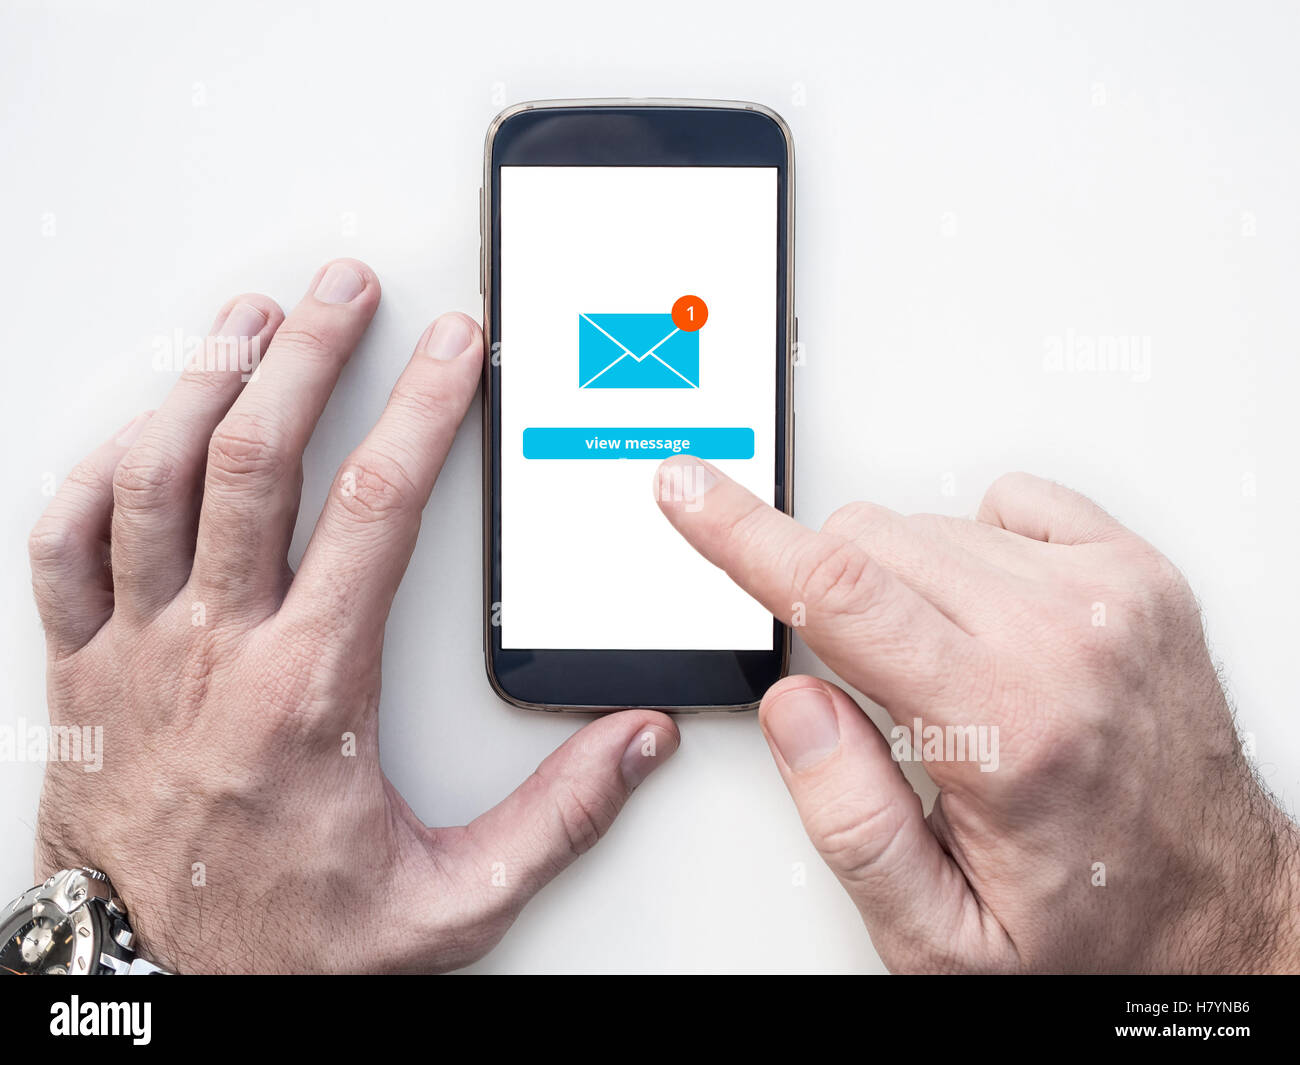 Man's hands using smartphone with Email app interface on screen Stock Photo